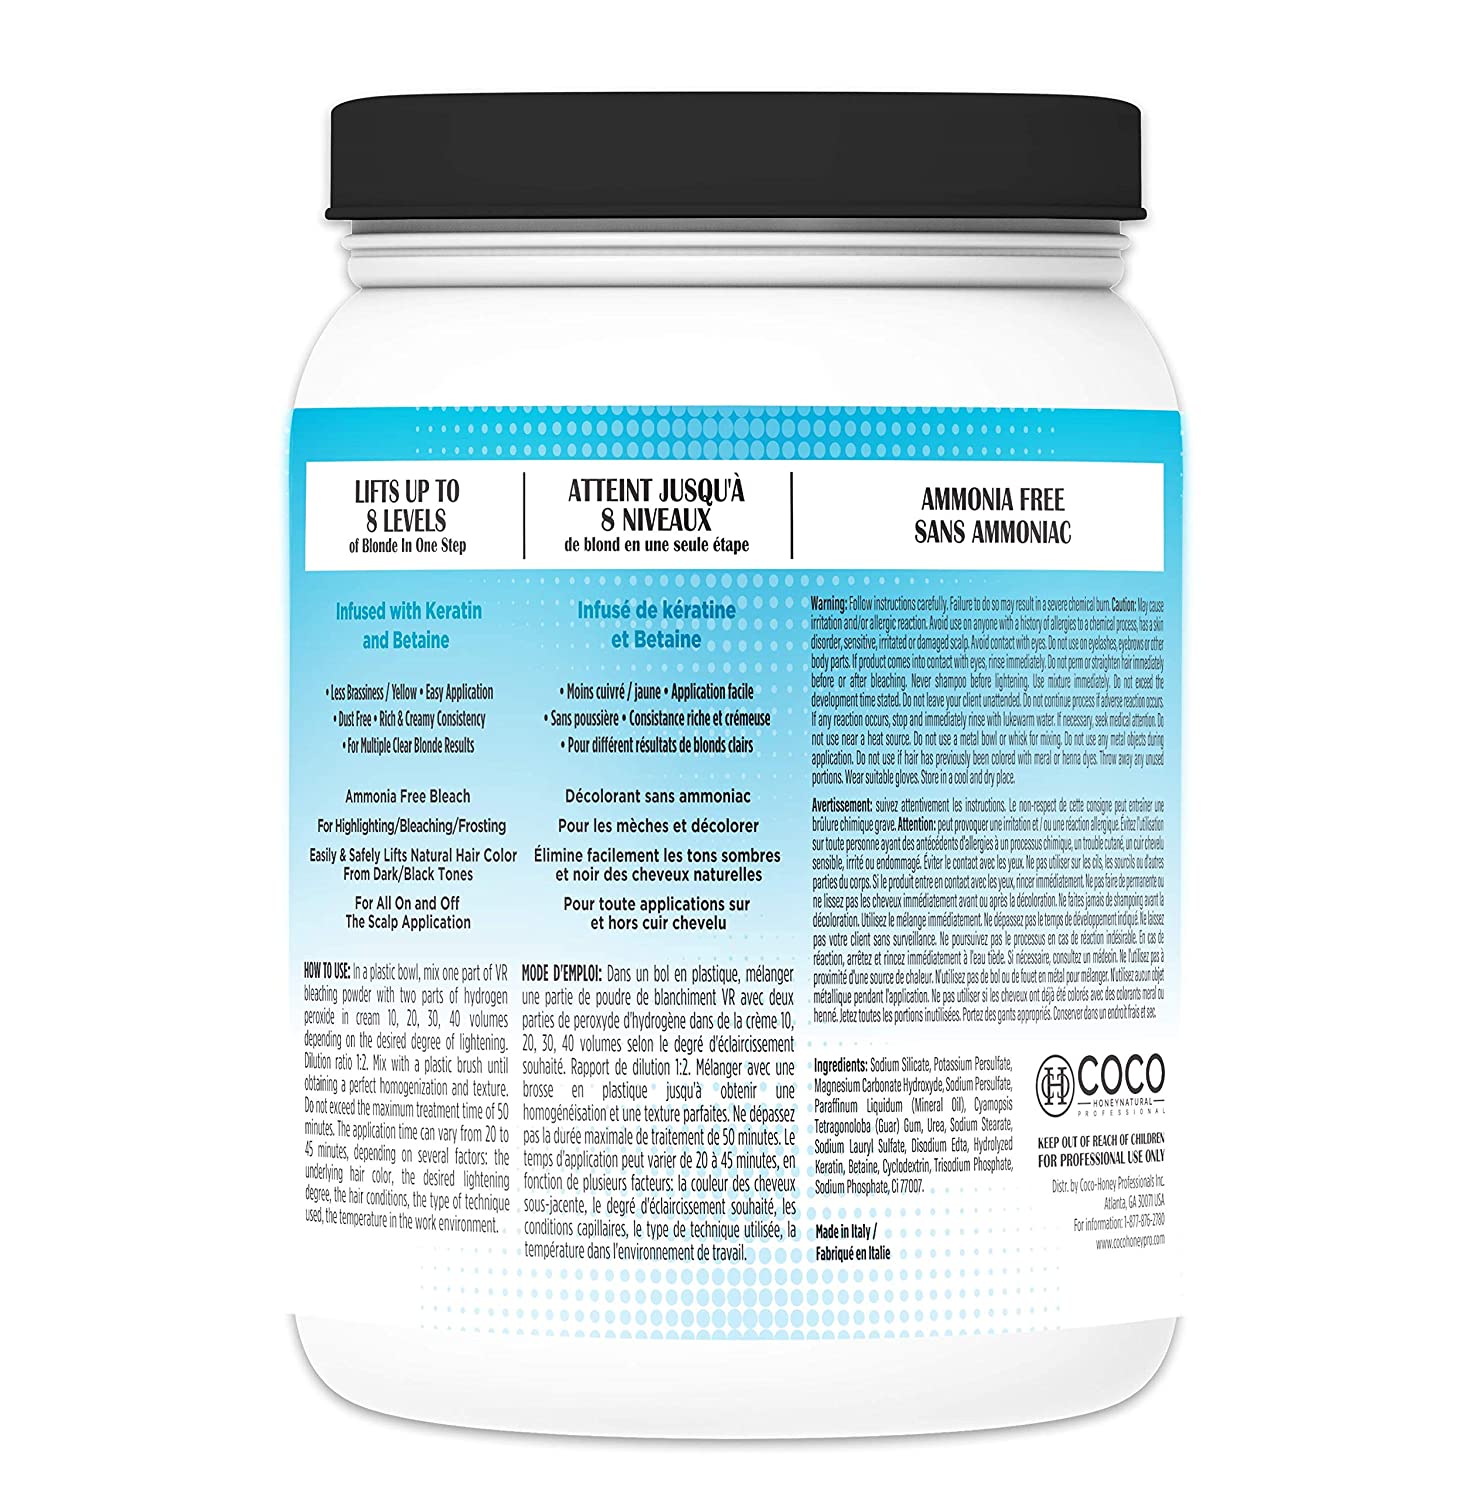 VR Blue Bleaching Hair Powder Extra Strength Lightener & Toner by Cocohoney, Made in Italy (17.5 oz (500 g)) Find Your New Look Today!